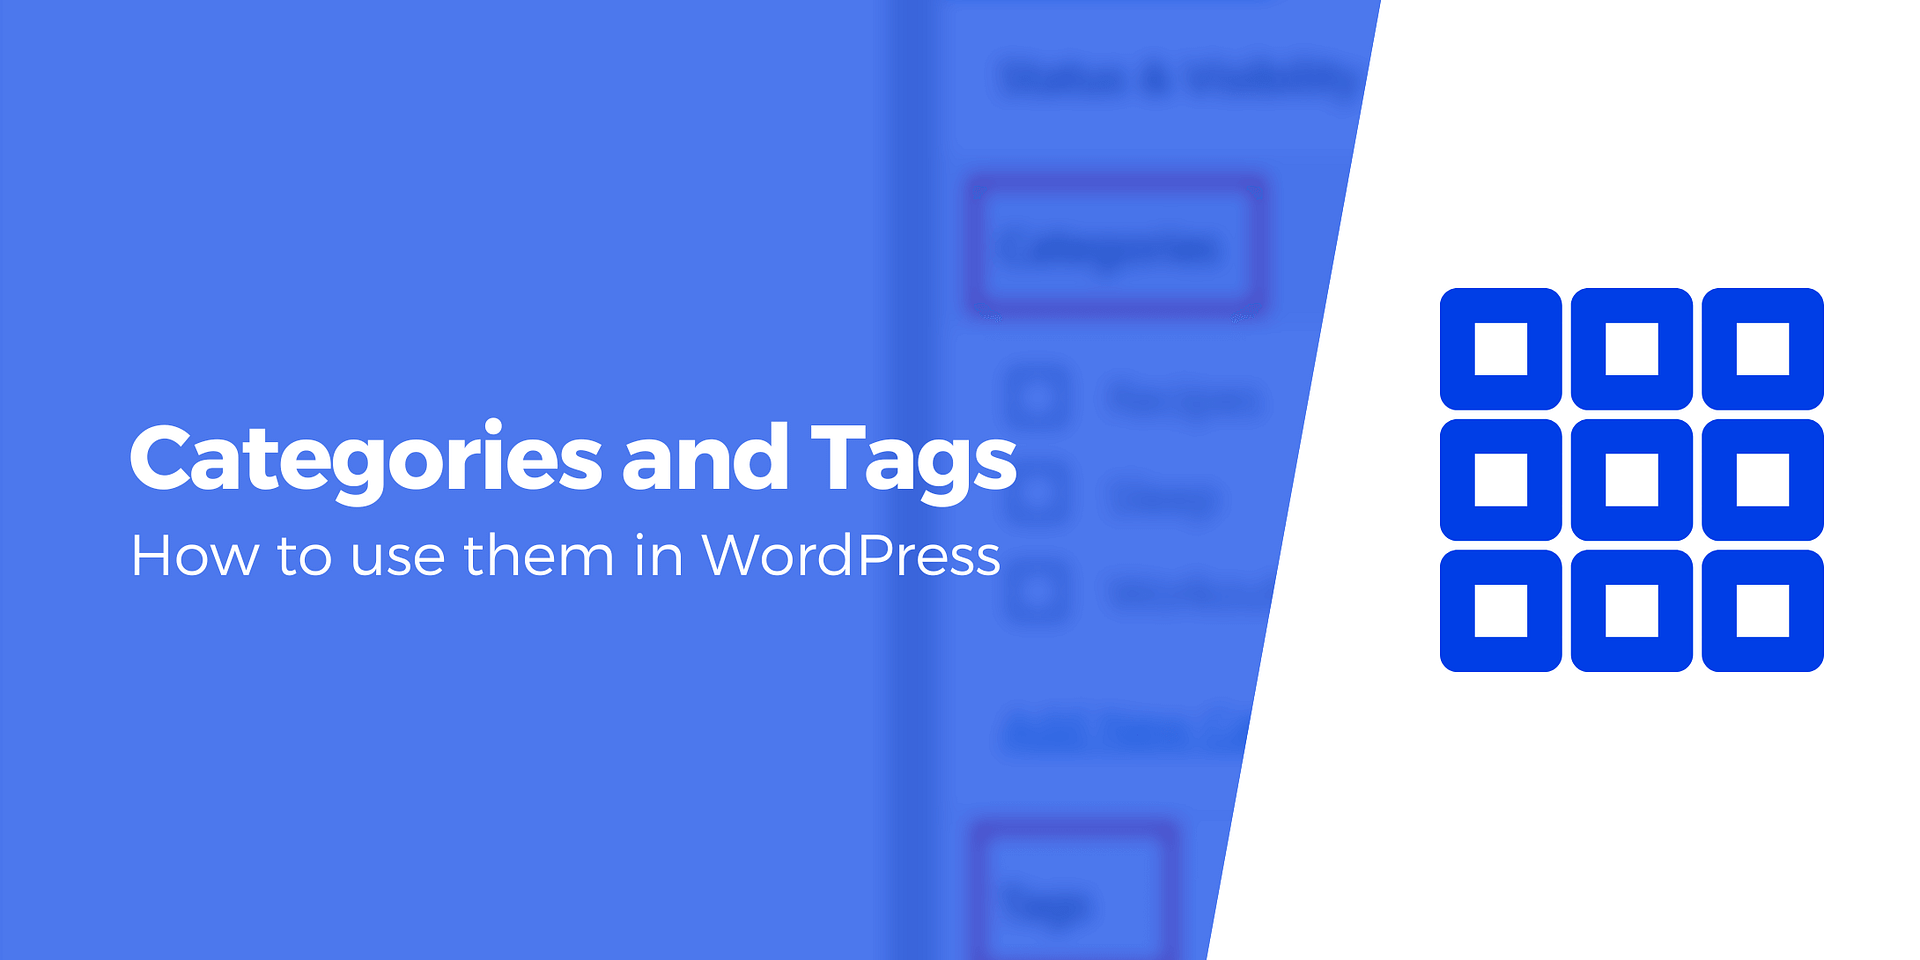 categories-and-tags-in-wordpress-how-to-use-them